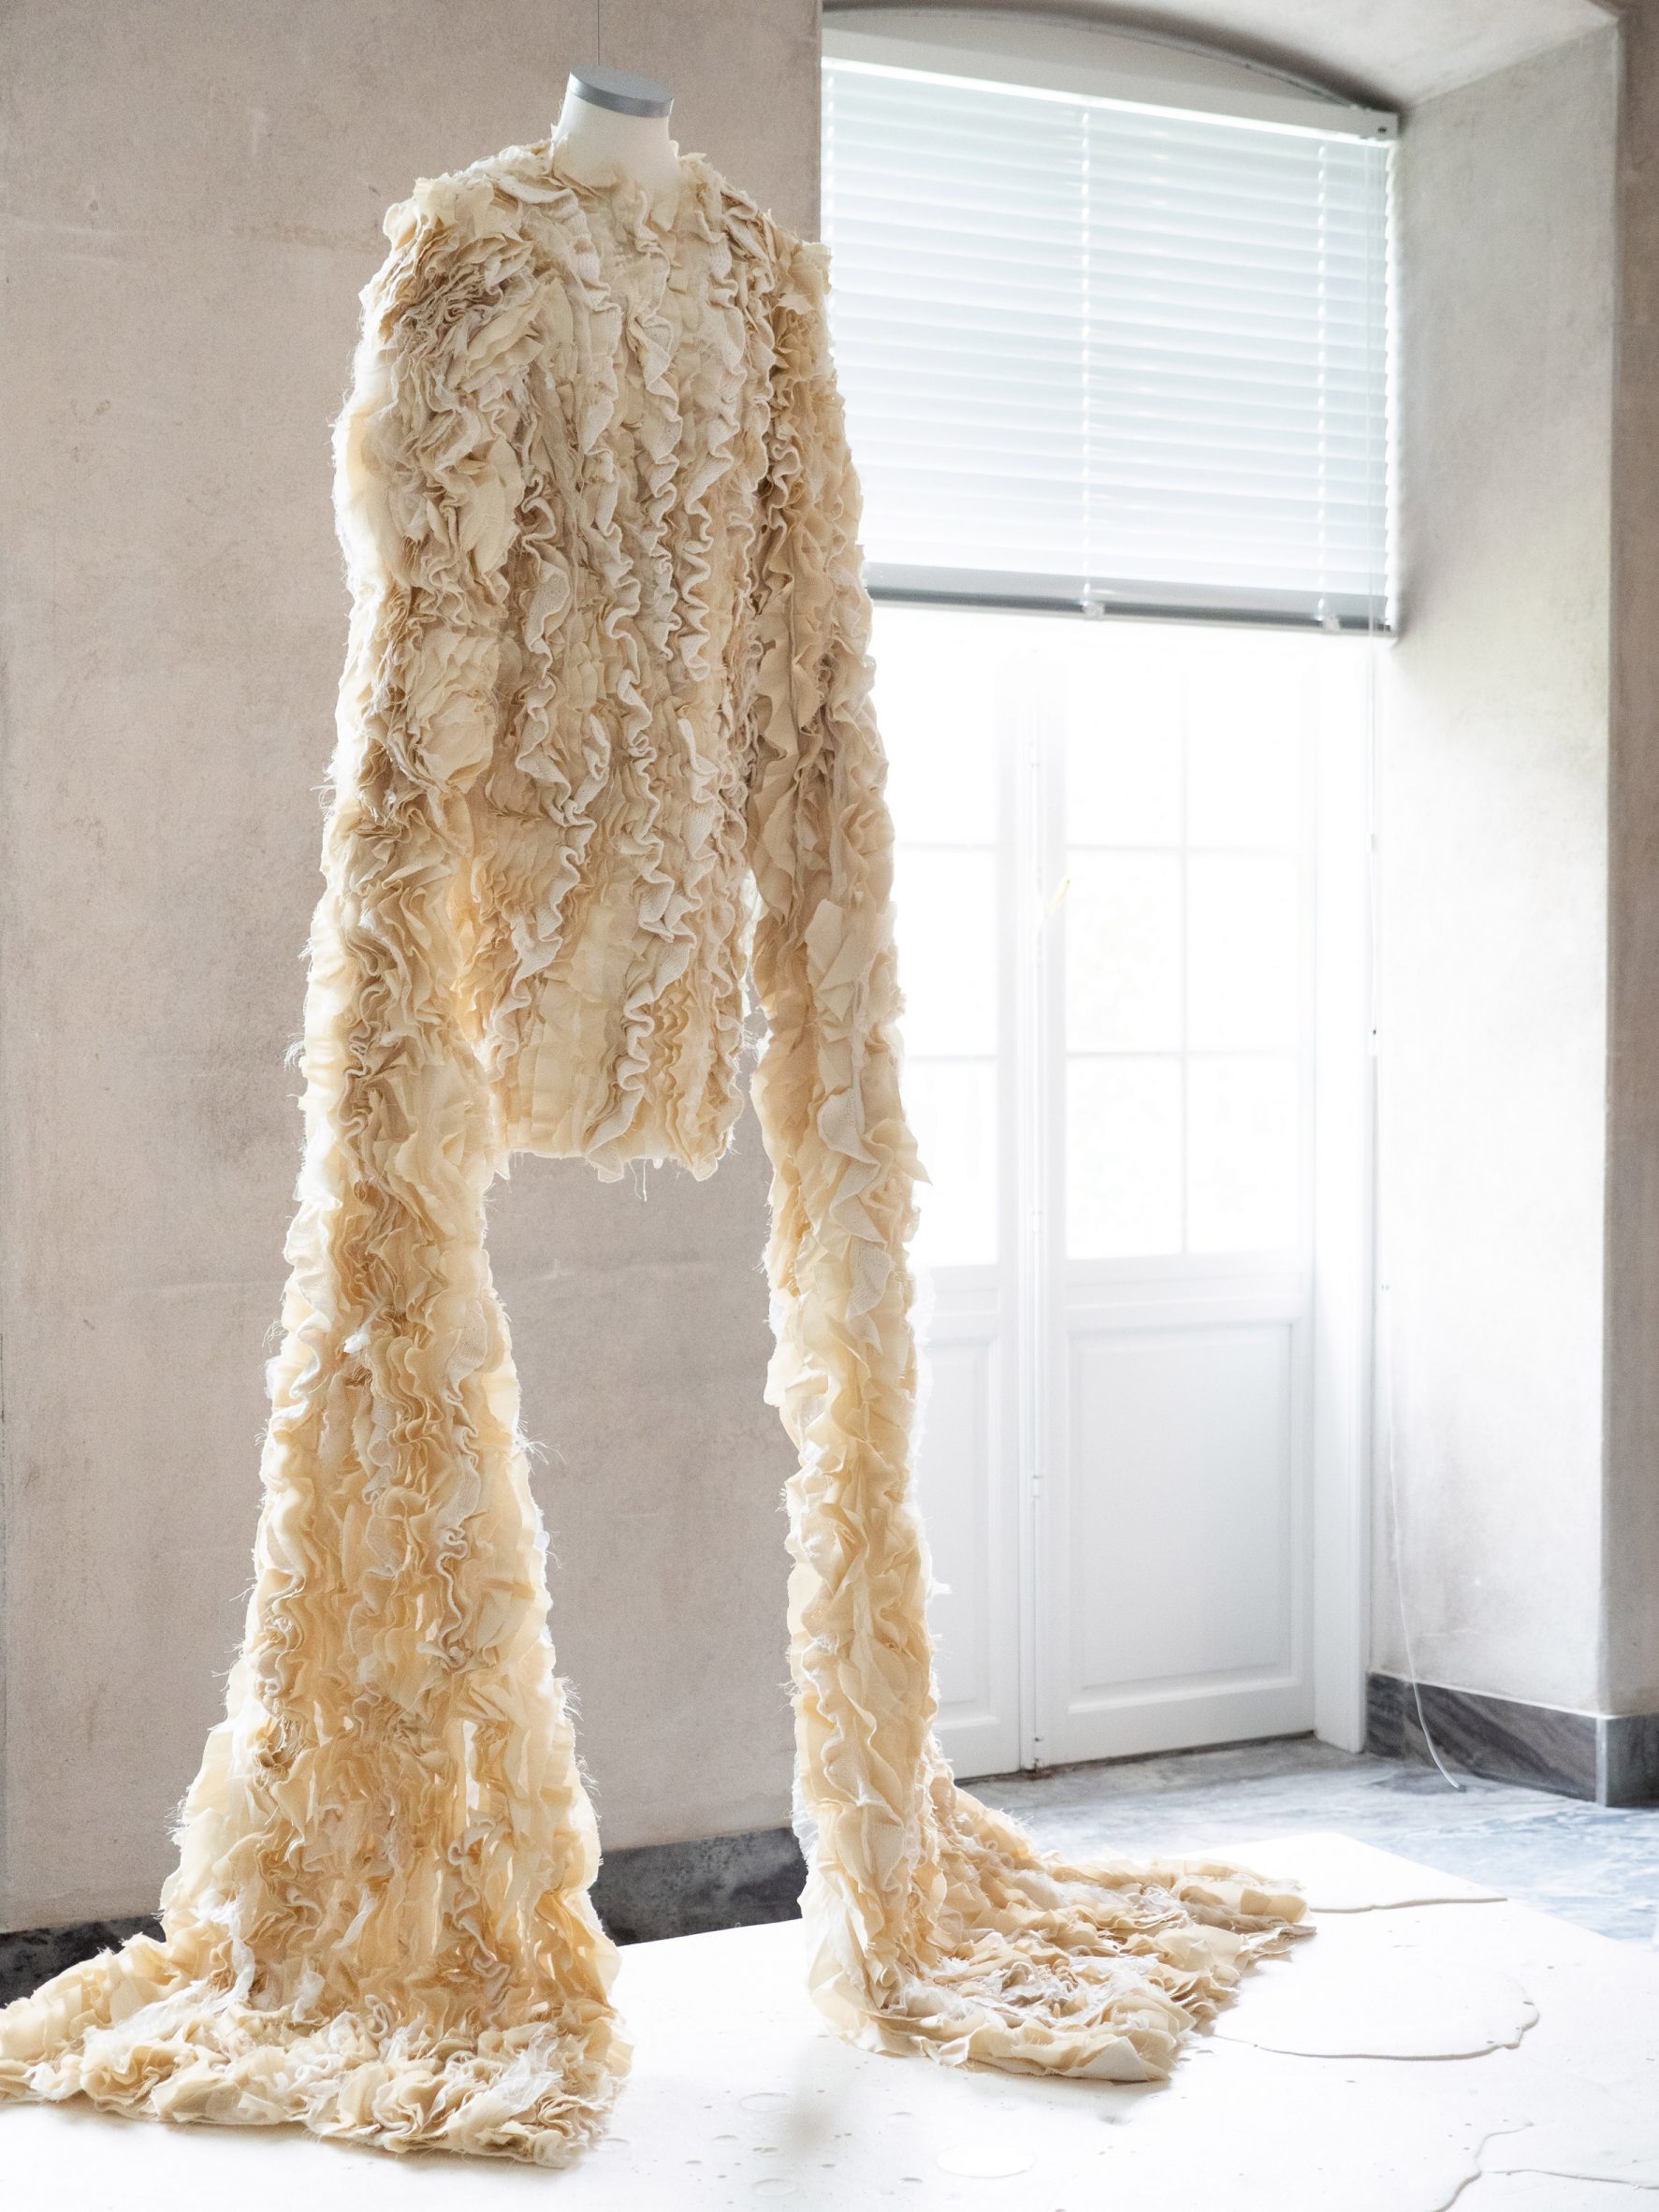 Ruffled dress made from dairy waste with bell sleeves on display at Designmuseum Denmark